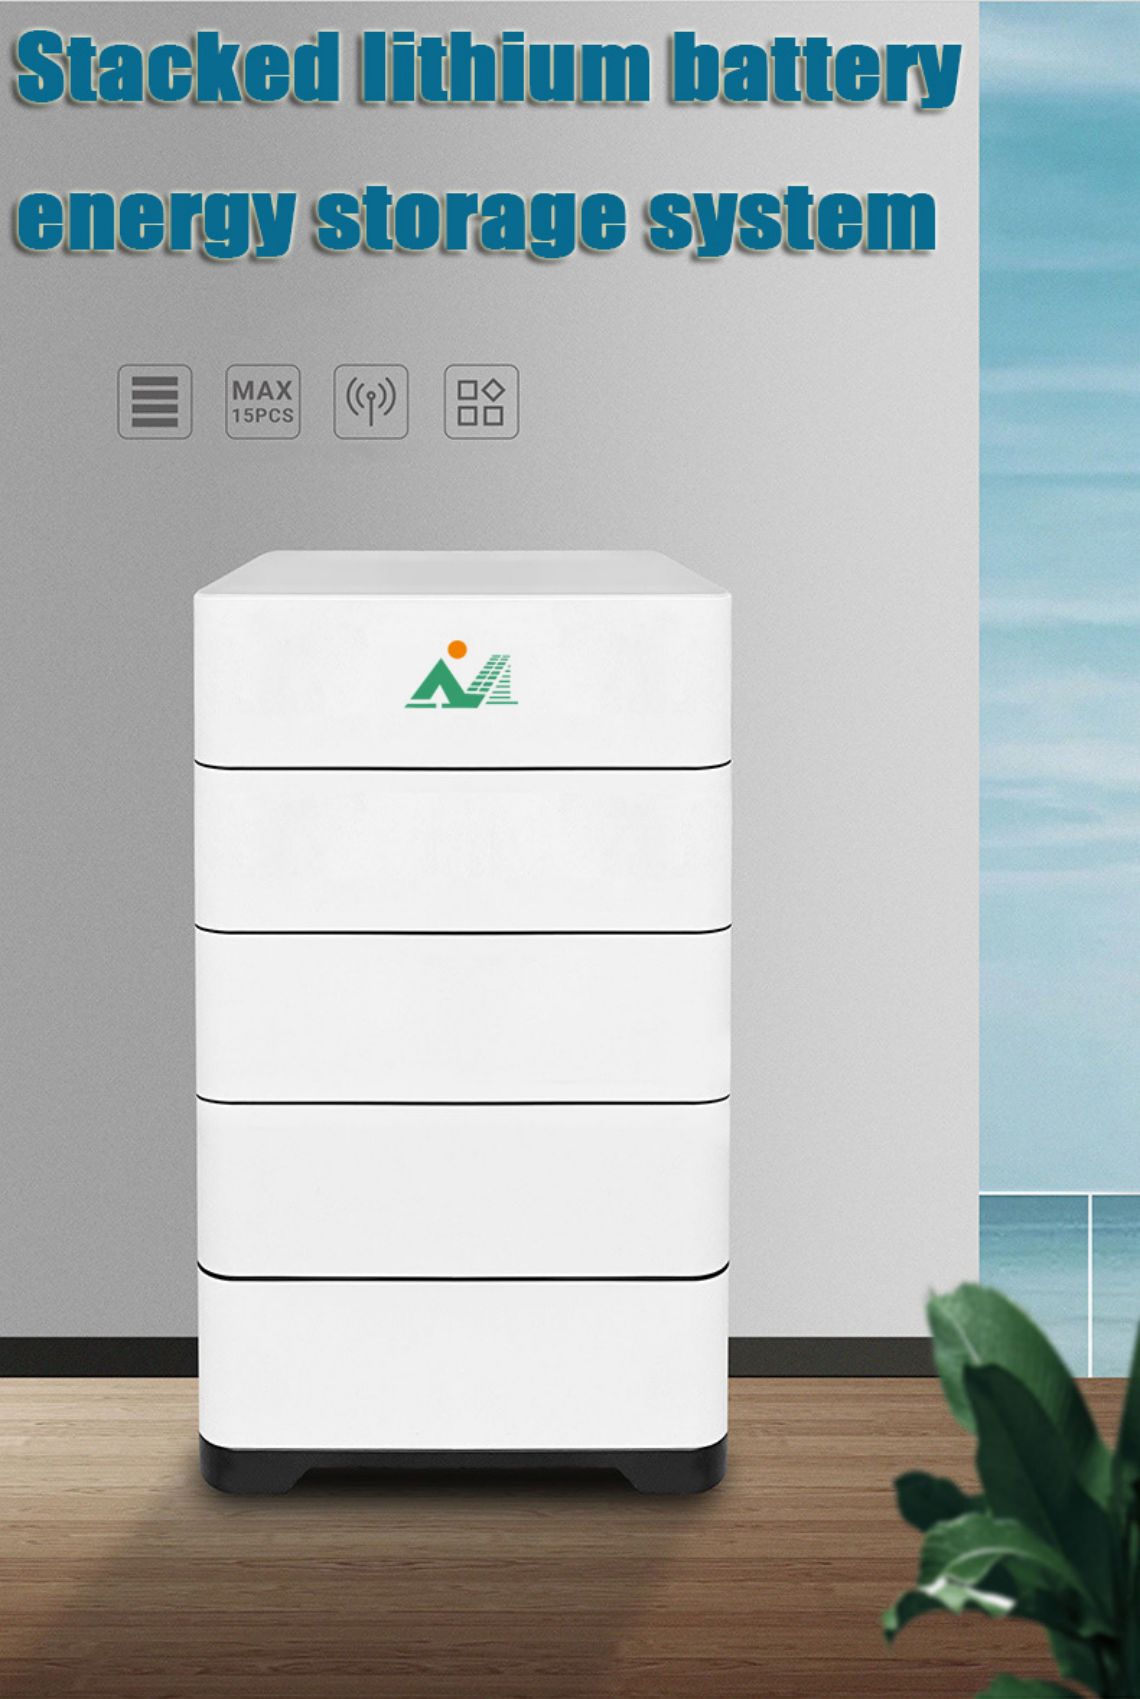 Stack Lithium Battery Energy Storage System